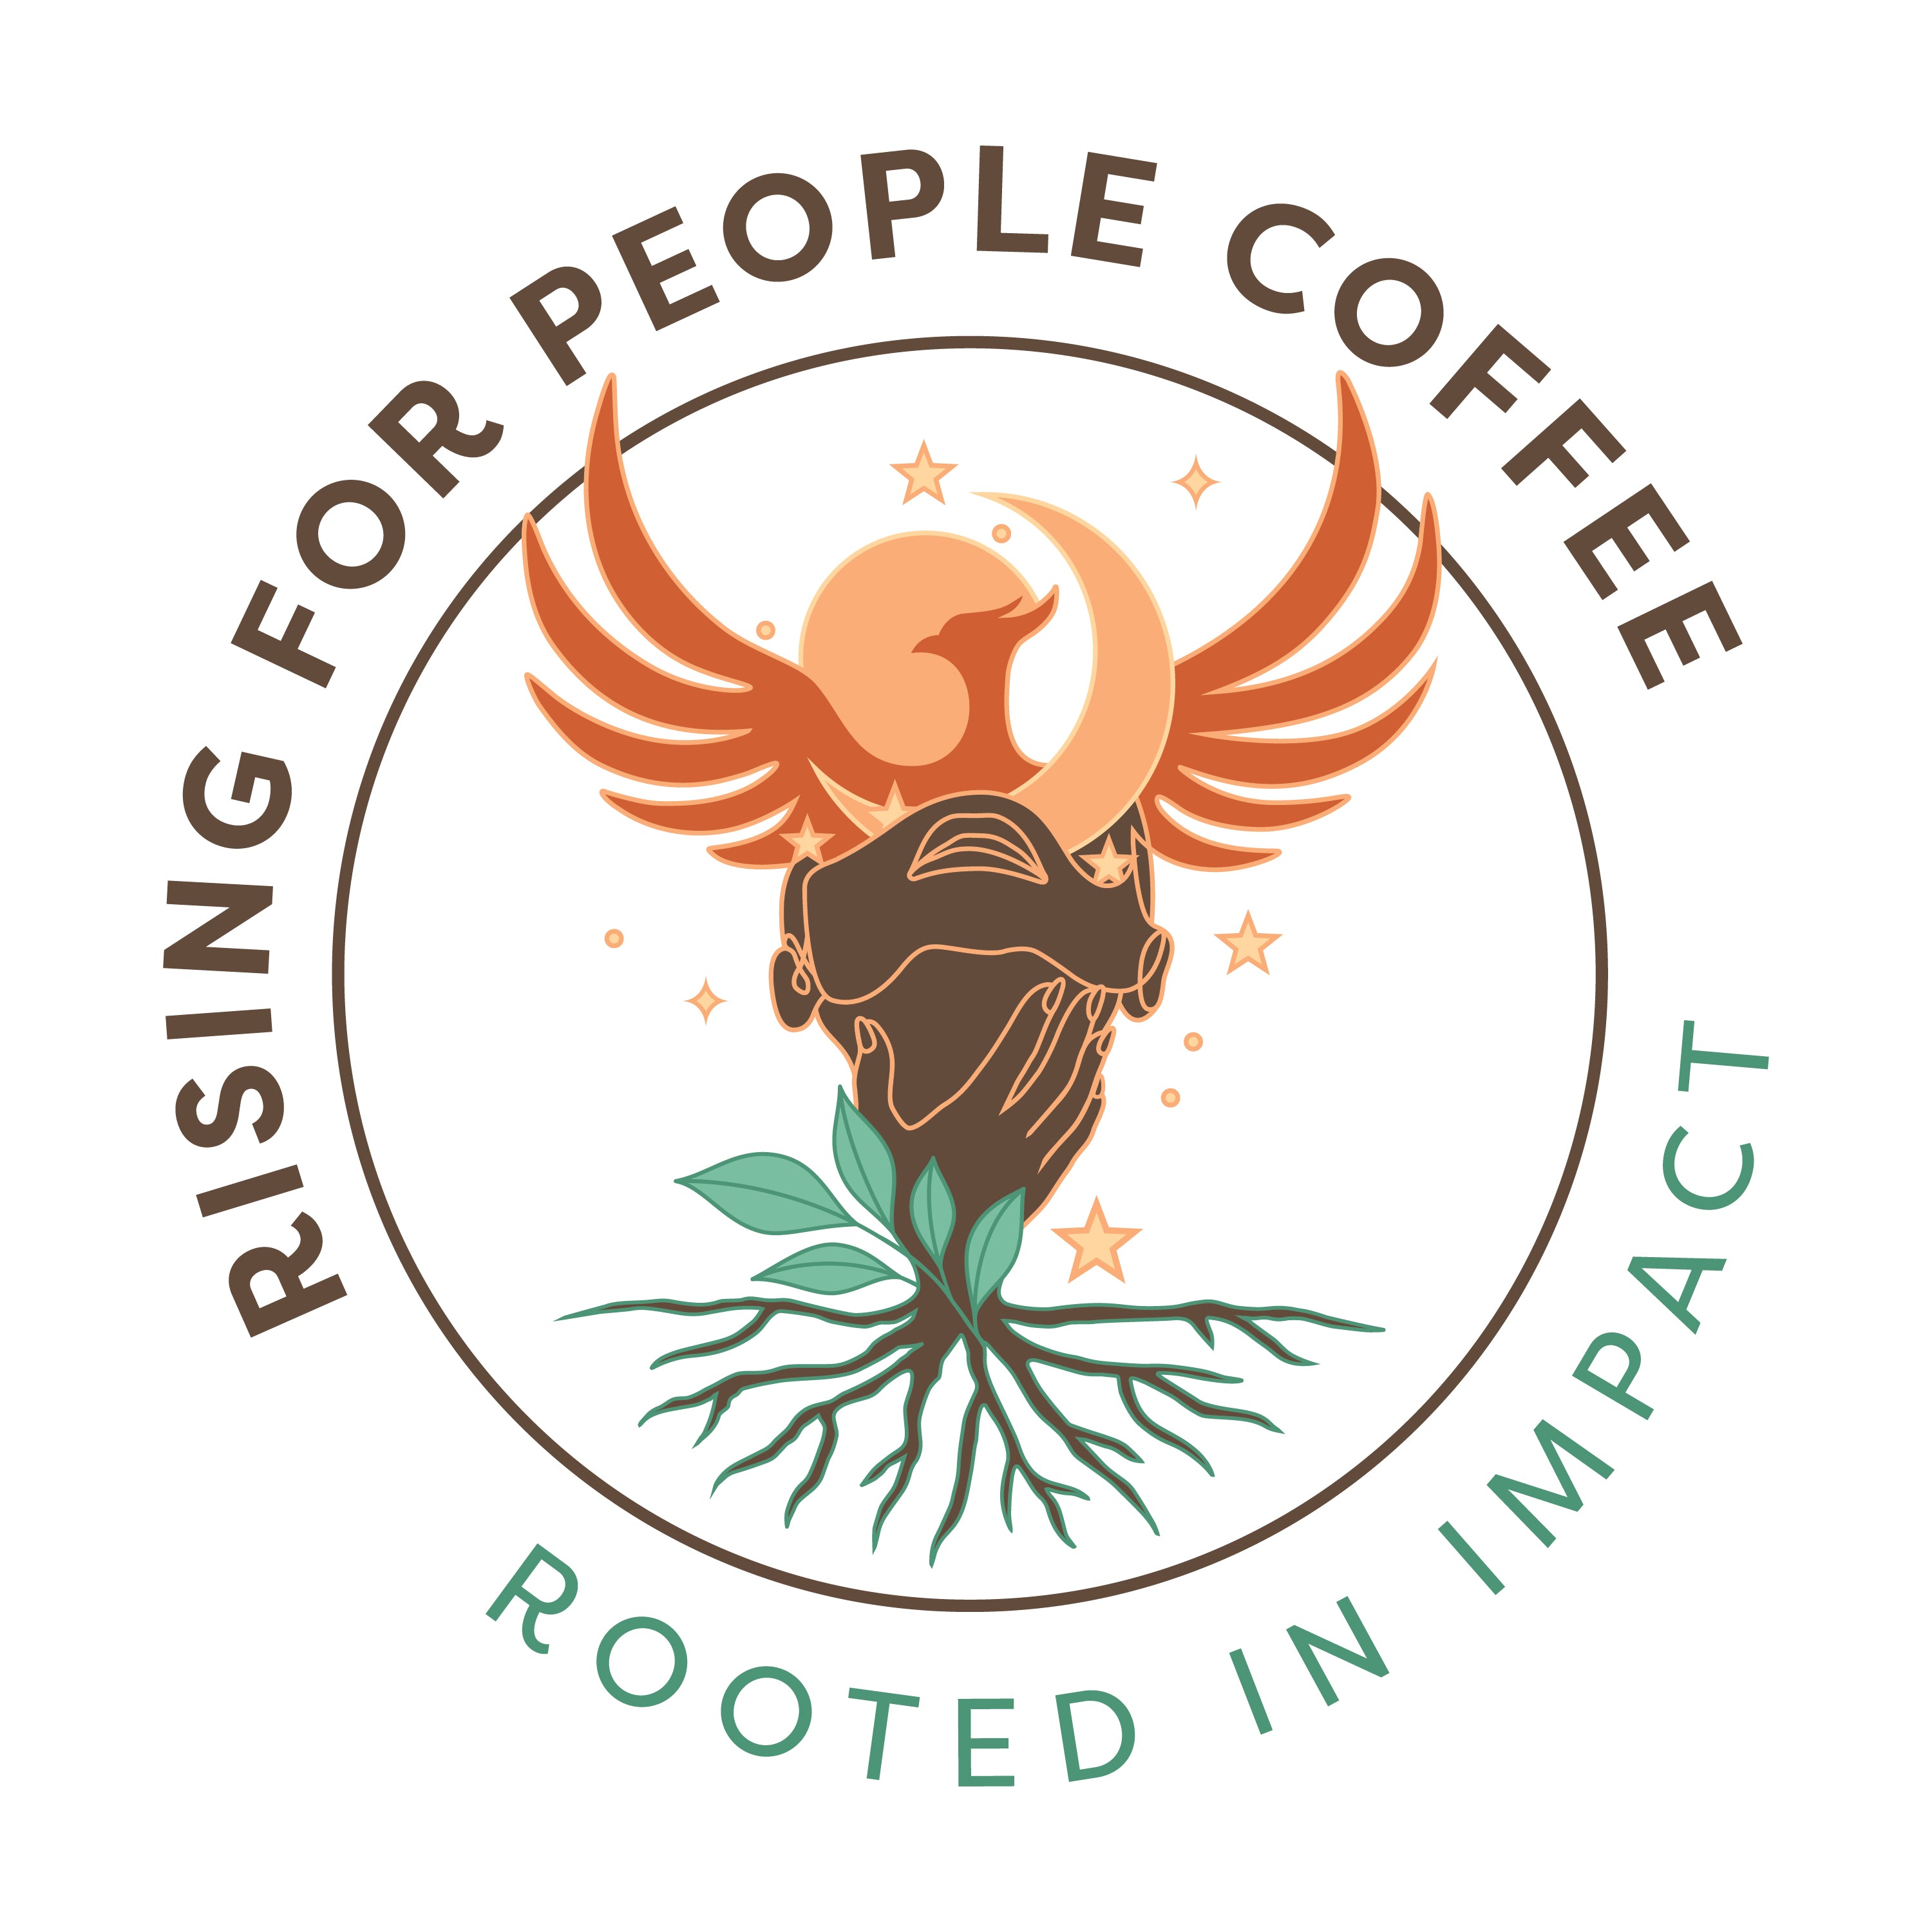 Rising For People Coffee Co.